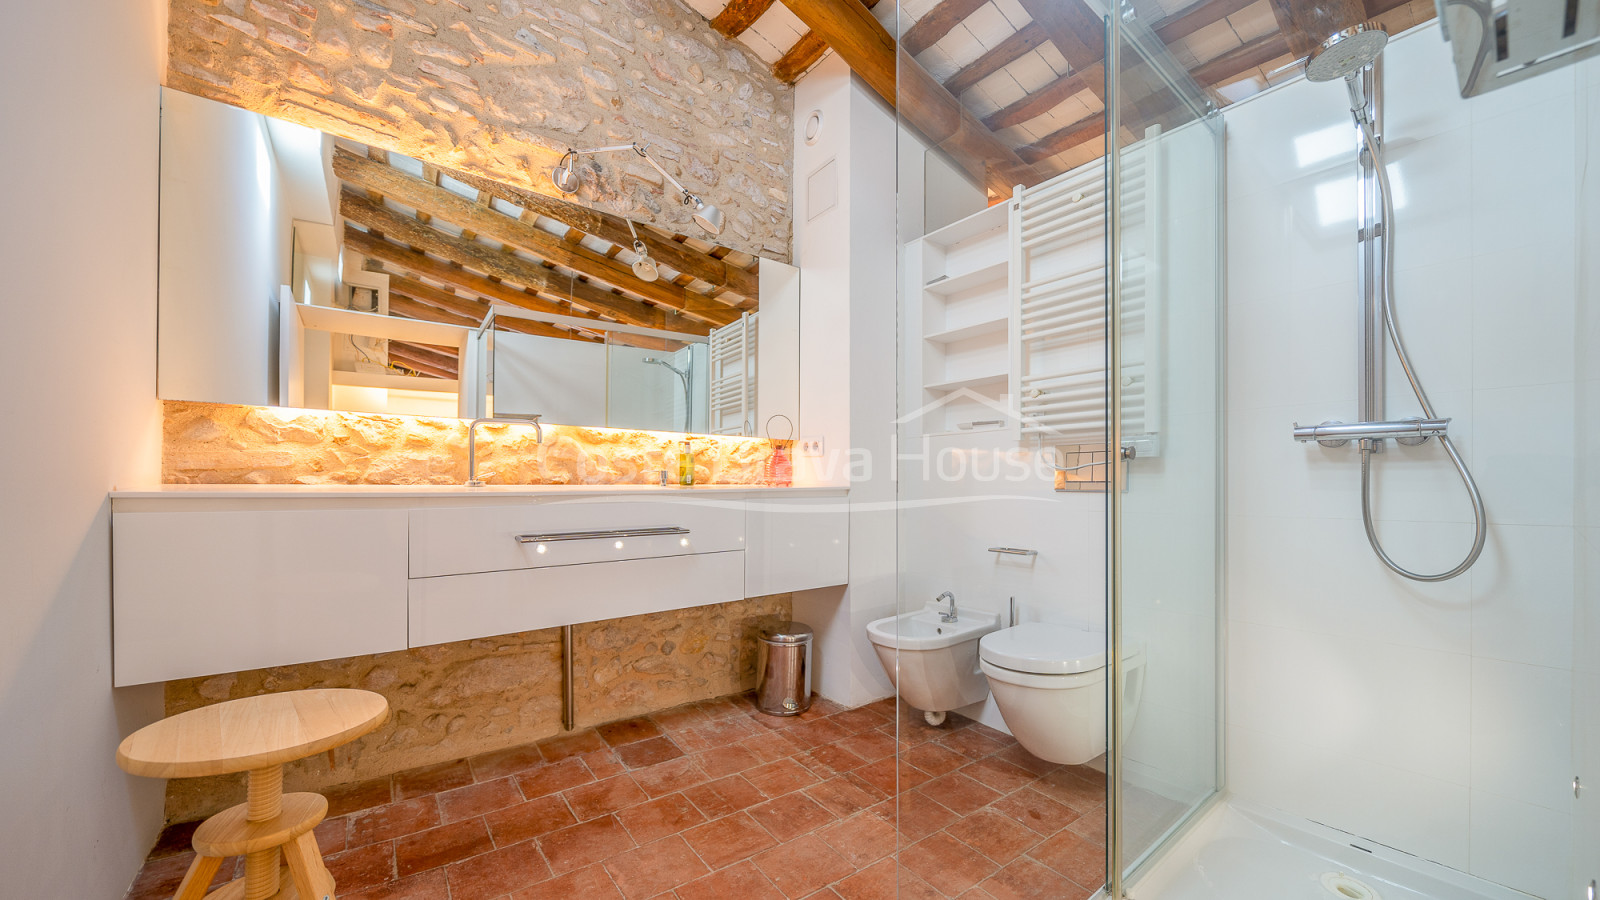 Renovated house, brand new, in Albons with contemporary rustic style